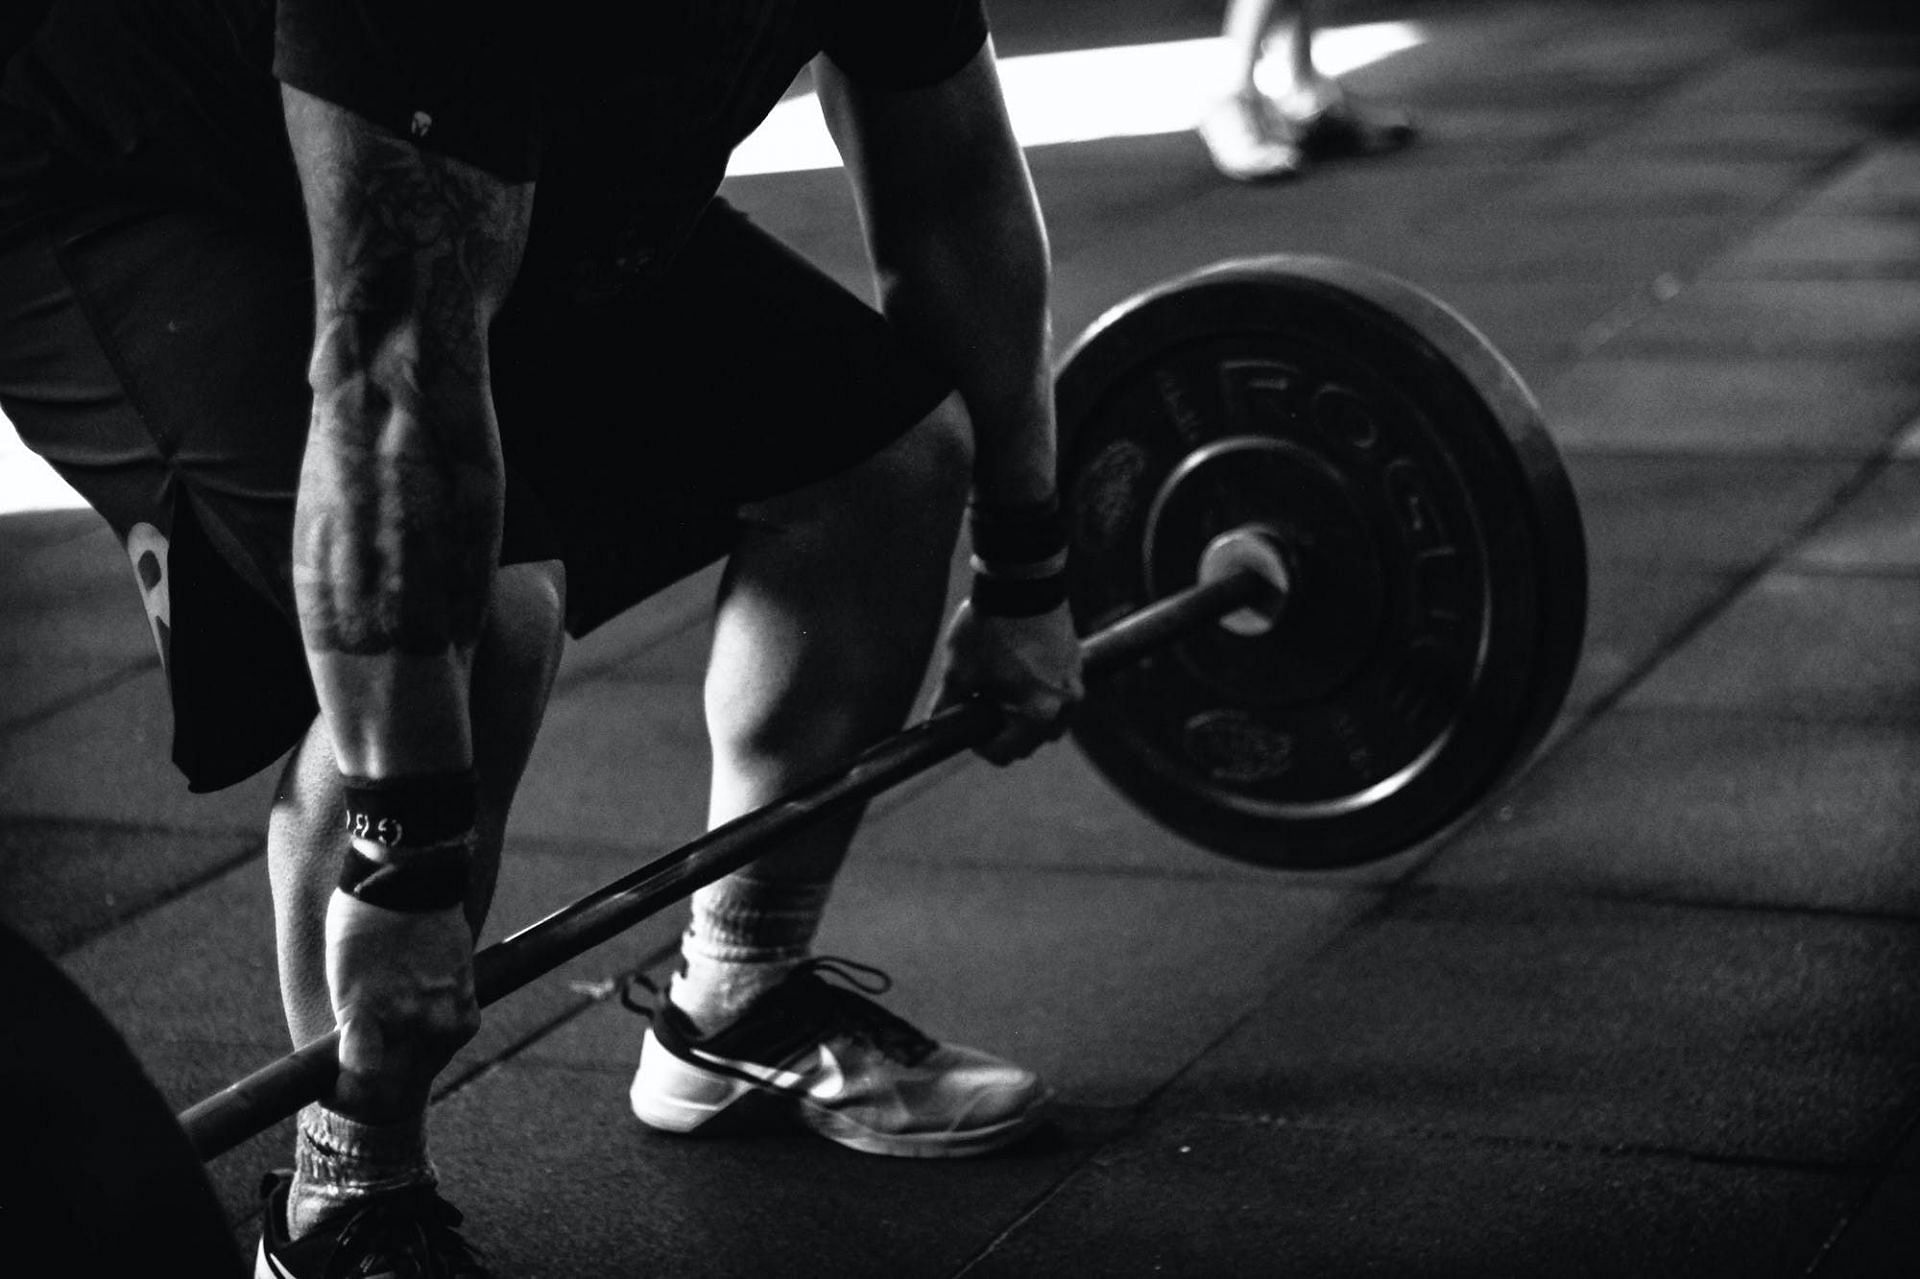 Importance of deadlift warm up (image sourced via Pexels / Photo by victor)